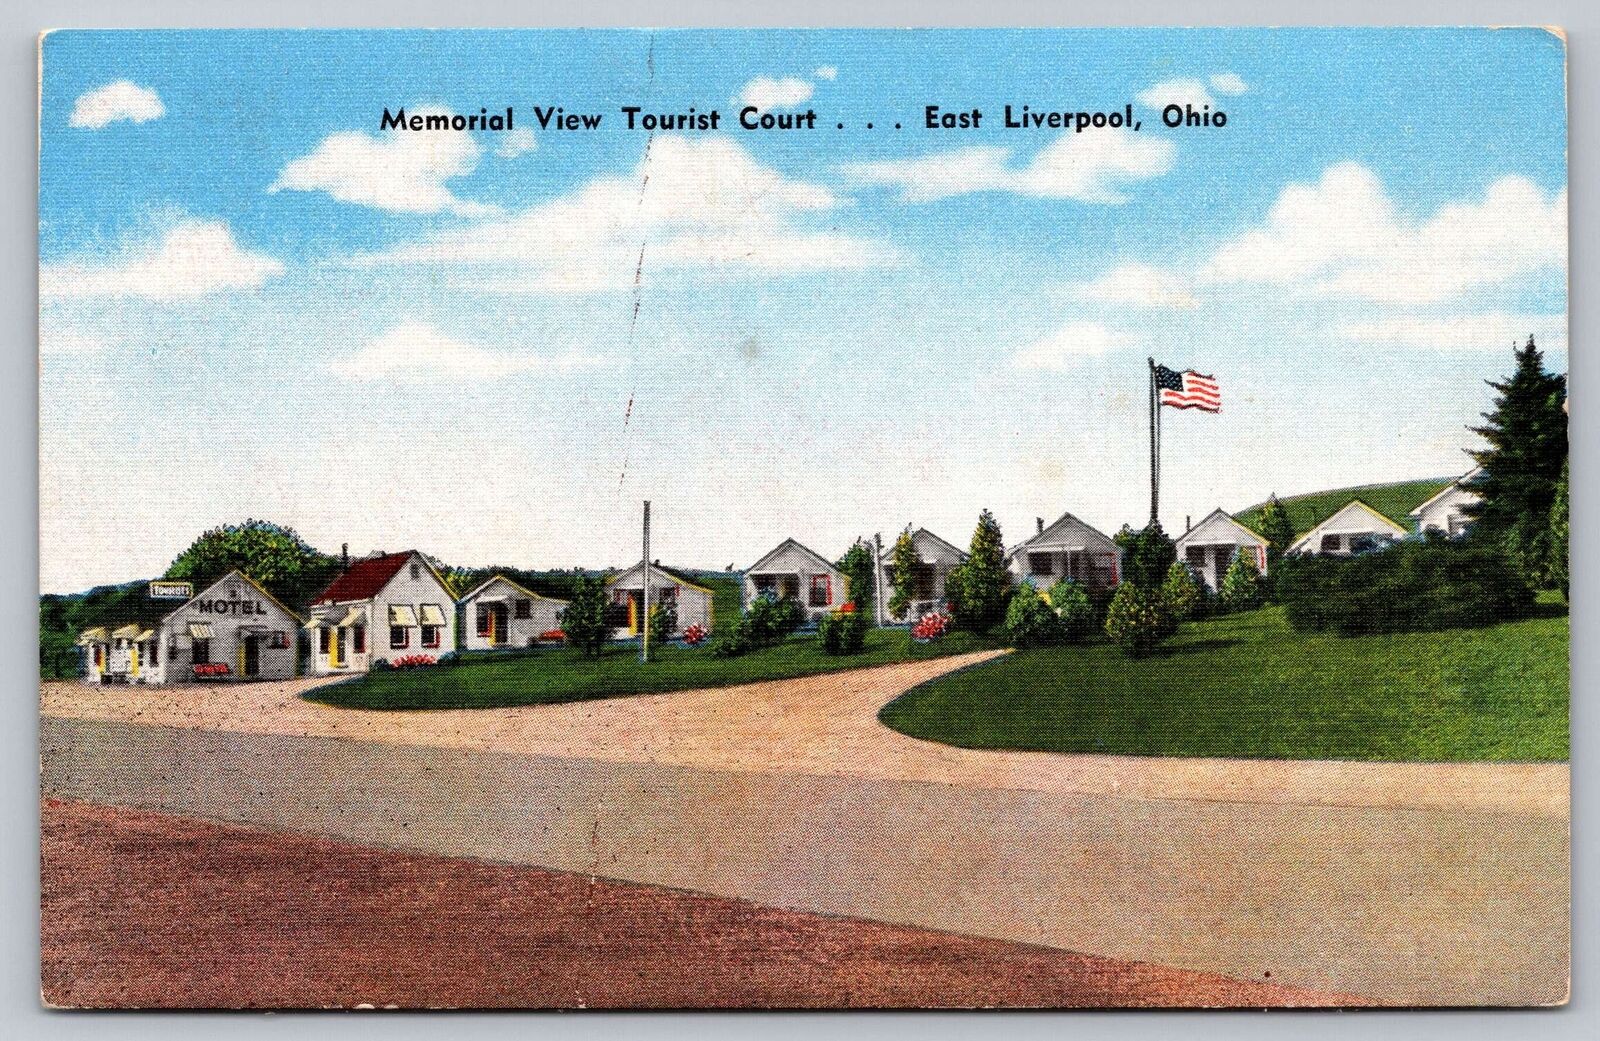 East Liverpool OH - Memorial View Tourist Court - Motel - Flag